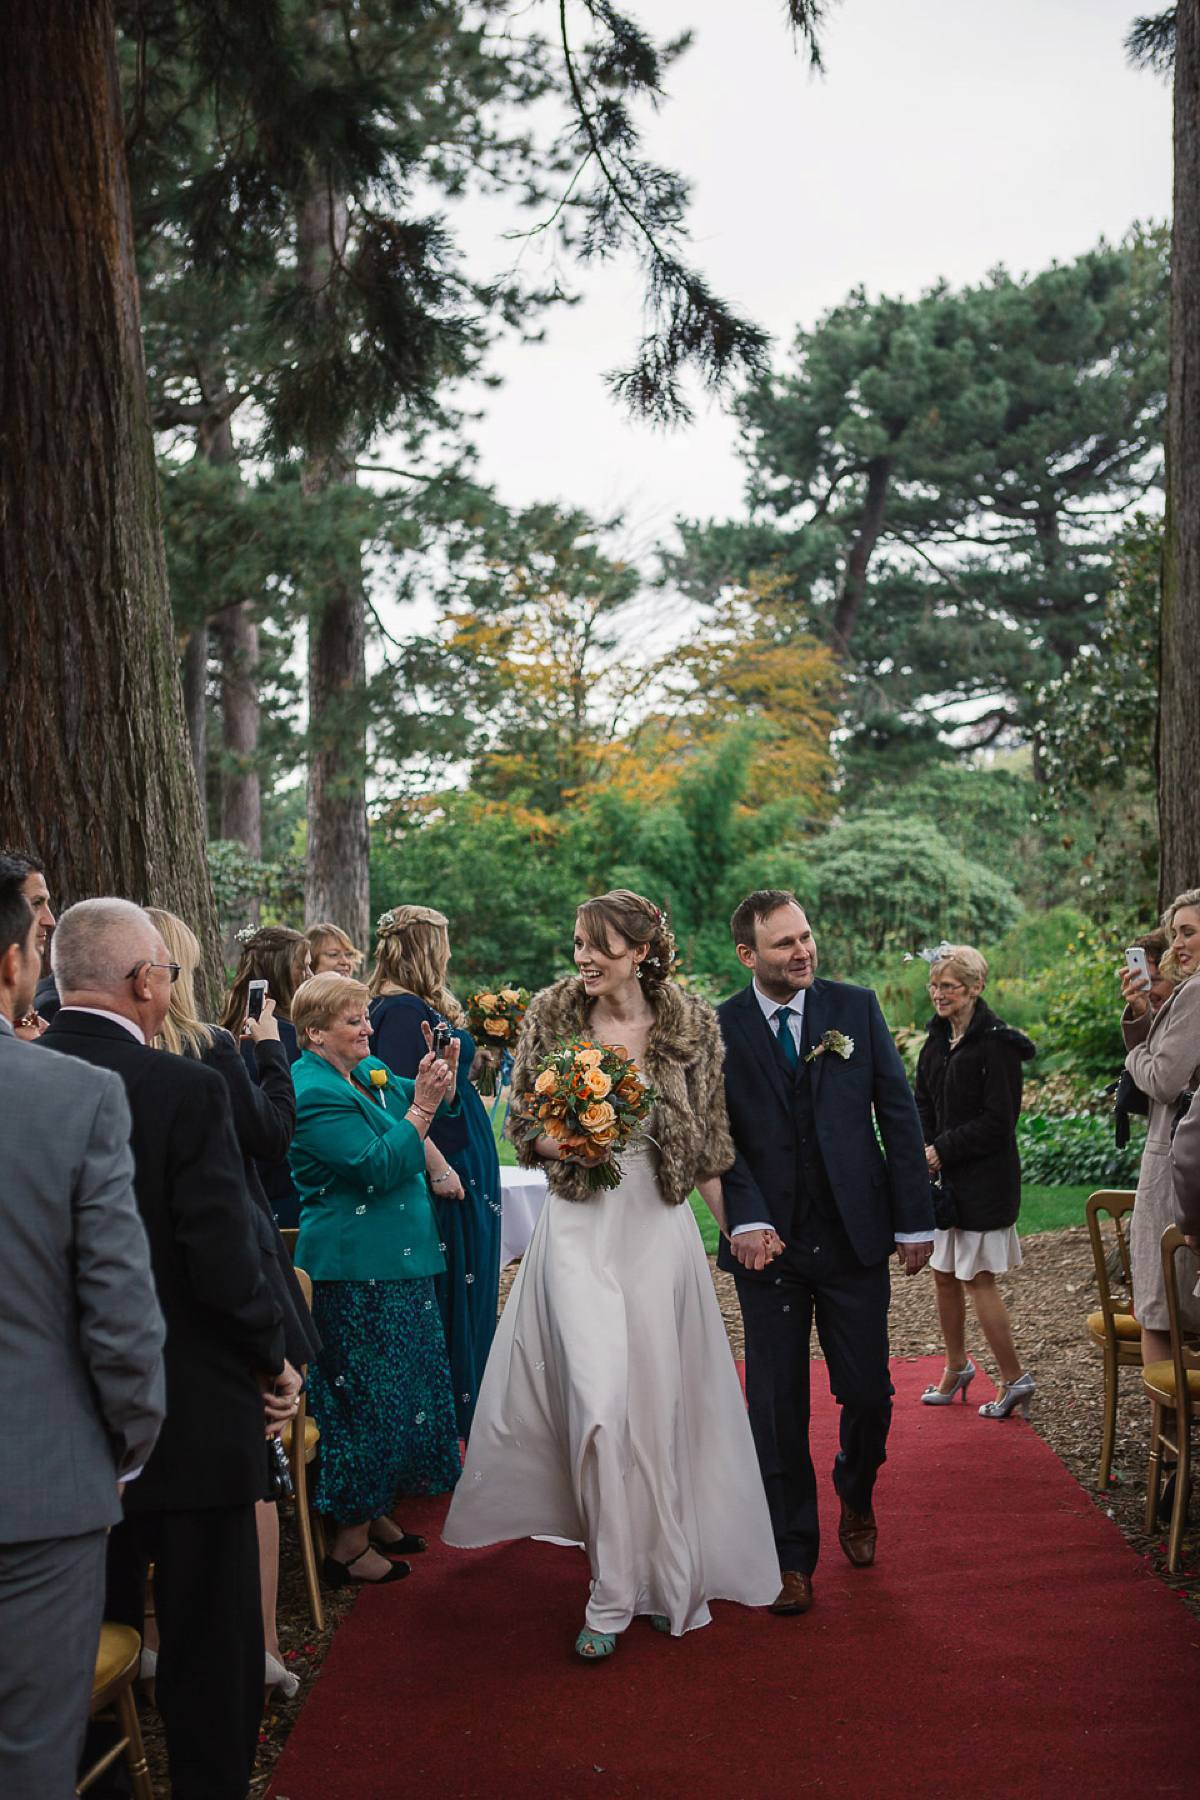 Julia wore a gown by Rowanjoy and a pair of green wedding shoes for her Royal Botanical Gardens wedding in Edinburgh. Photography by Jen Owens.